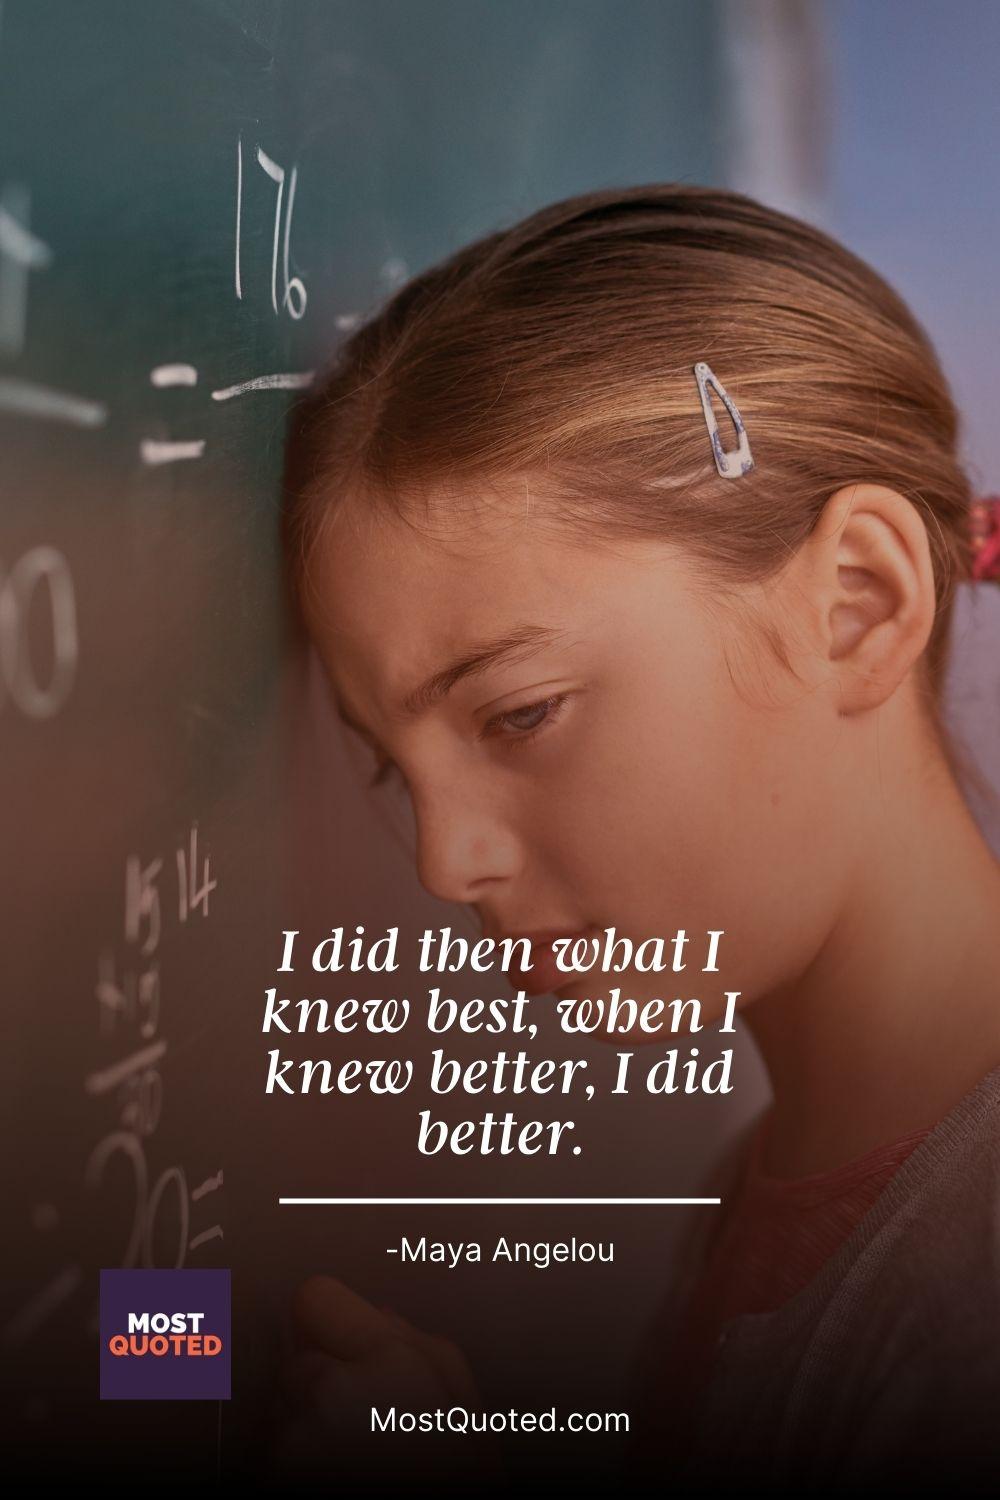 I did then what I knew best, when I knew better, I did better. - Maya Angelou